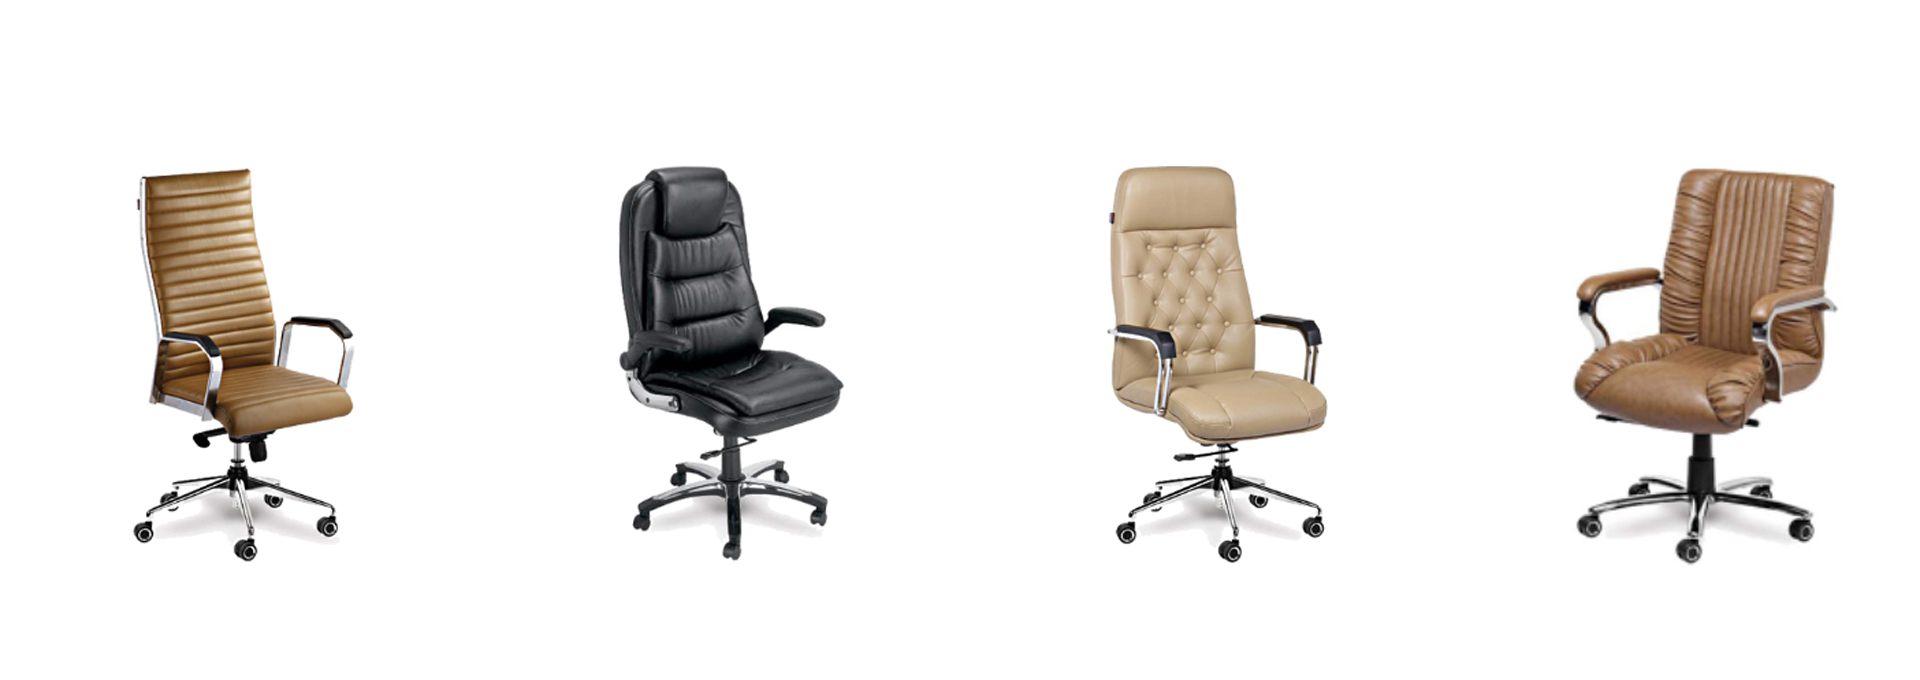 3 Finding High-Quality Office Chairs Toronto 3